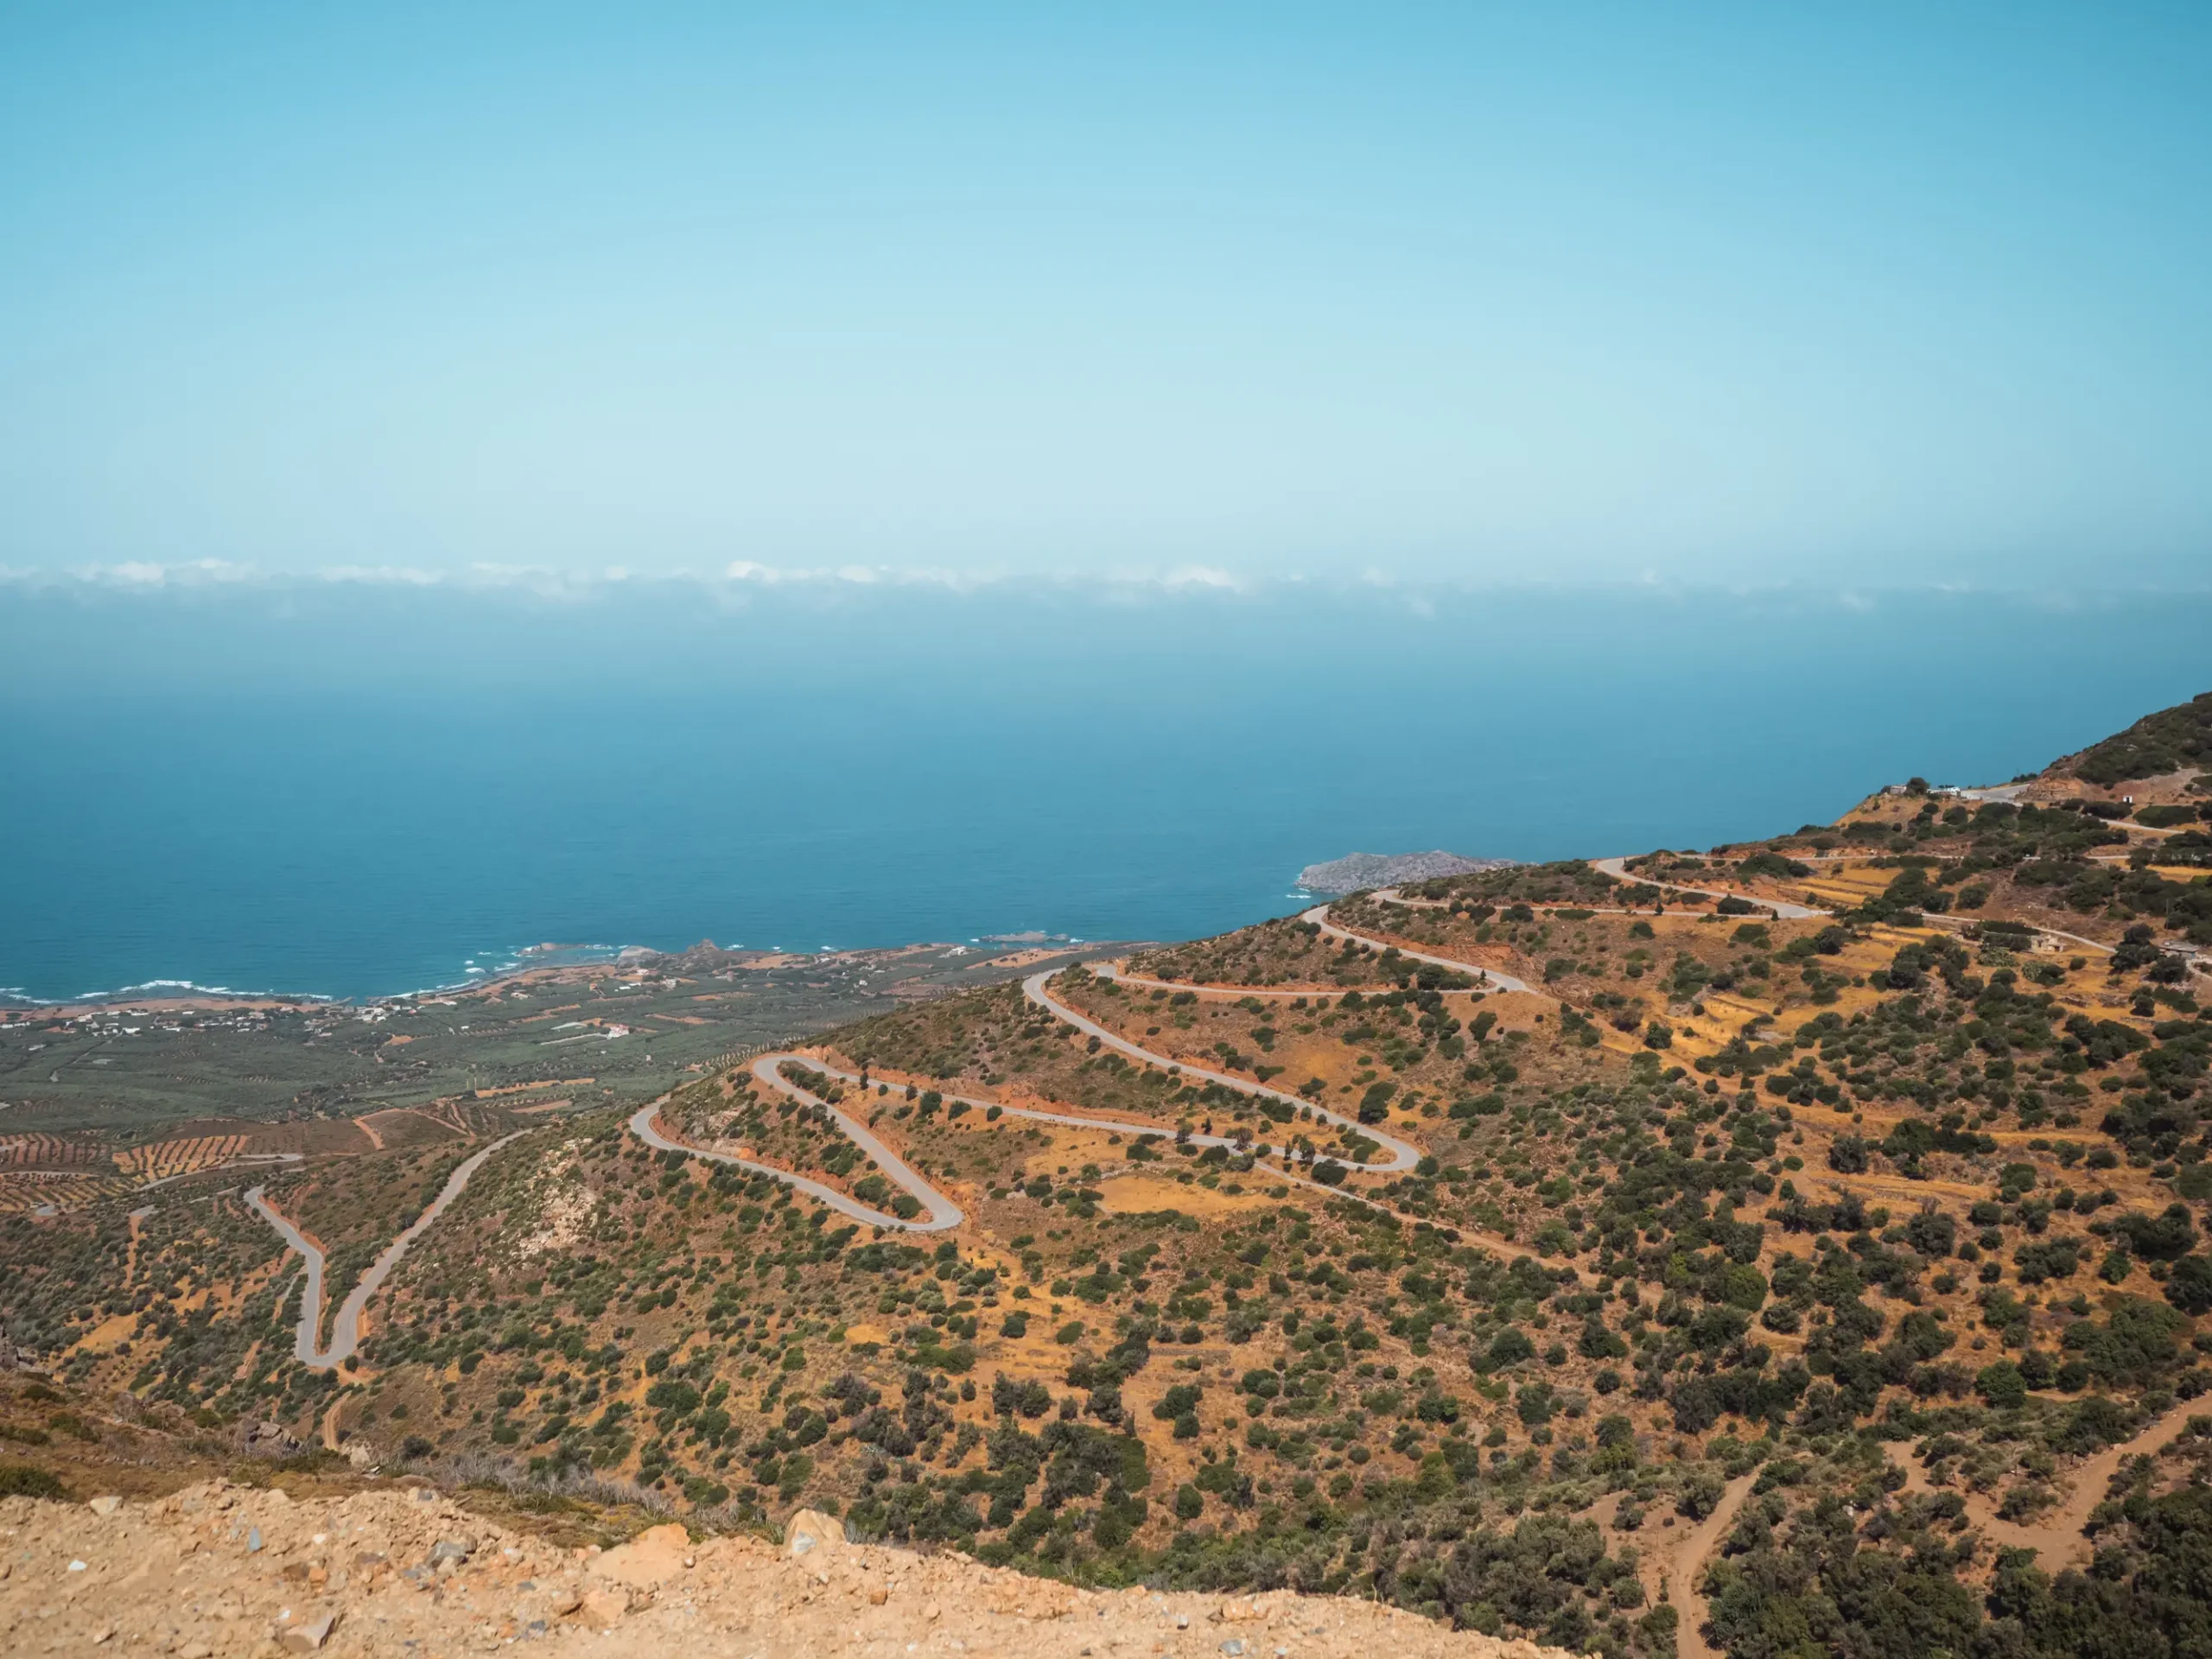 View from above of a windy mountain road with the sea in the background on the way from Chania and Falasarna to Elafonisi Beach.